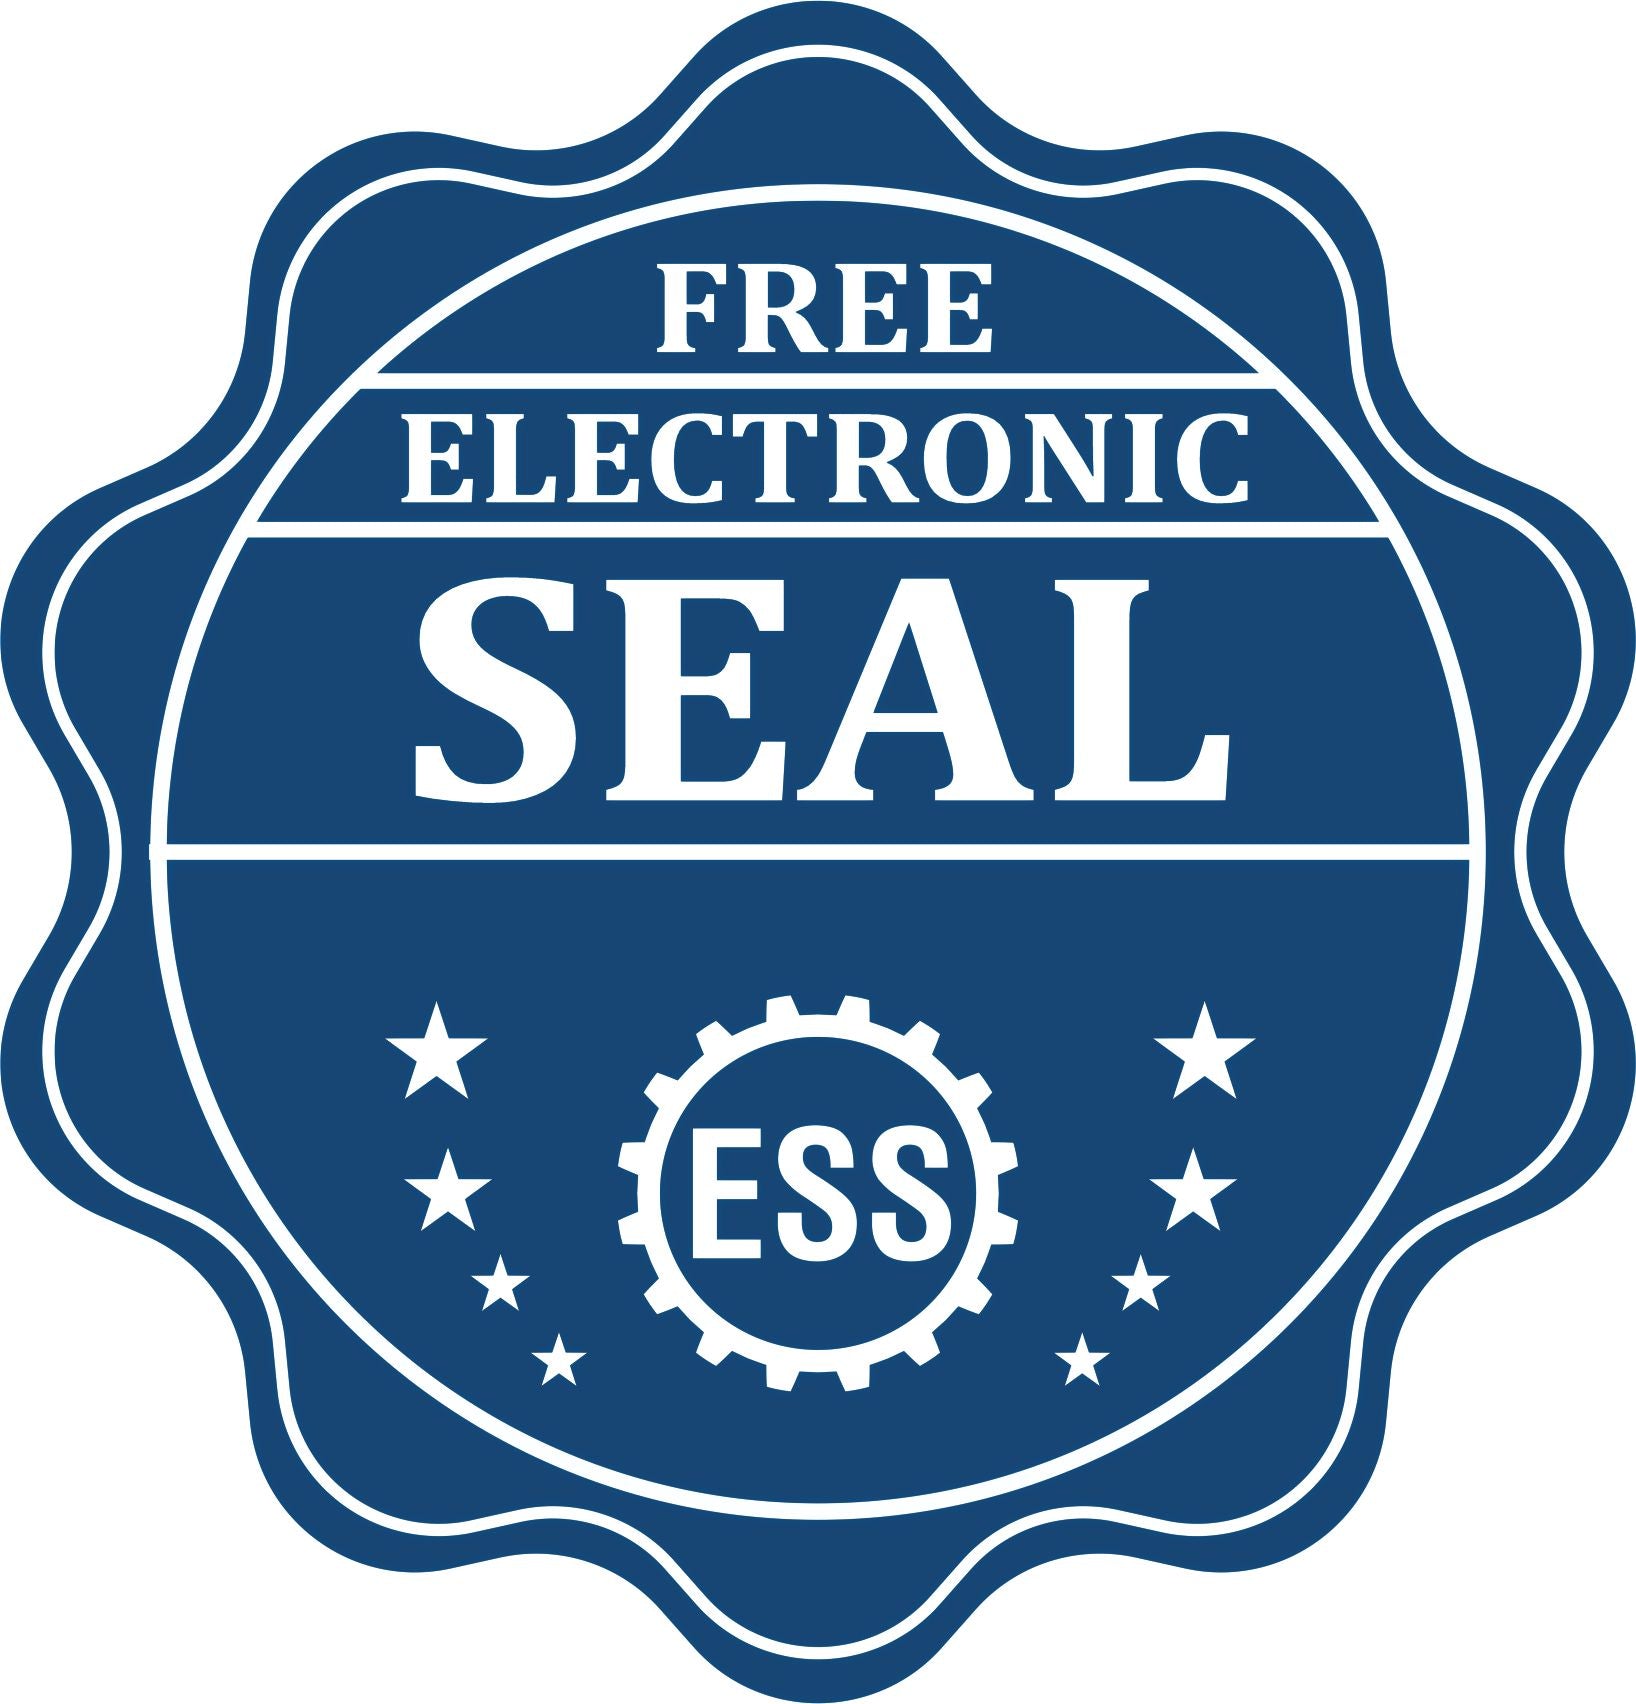 A badge showing a free electronic seal for the Premium MaxLight Pre-Inked West Virginia Engineering Stamp with stars and the ESS gear on the emblem.